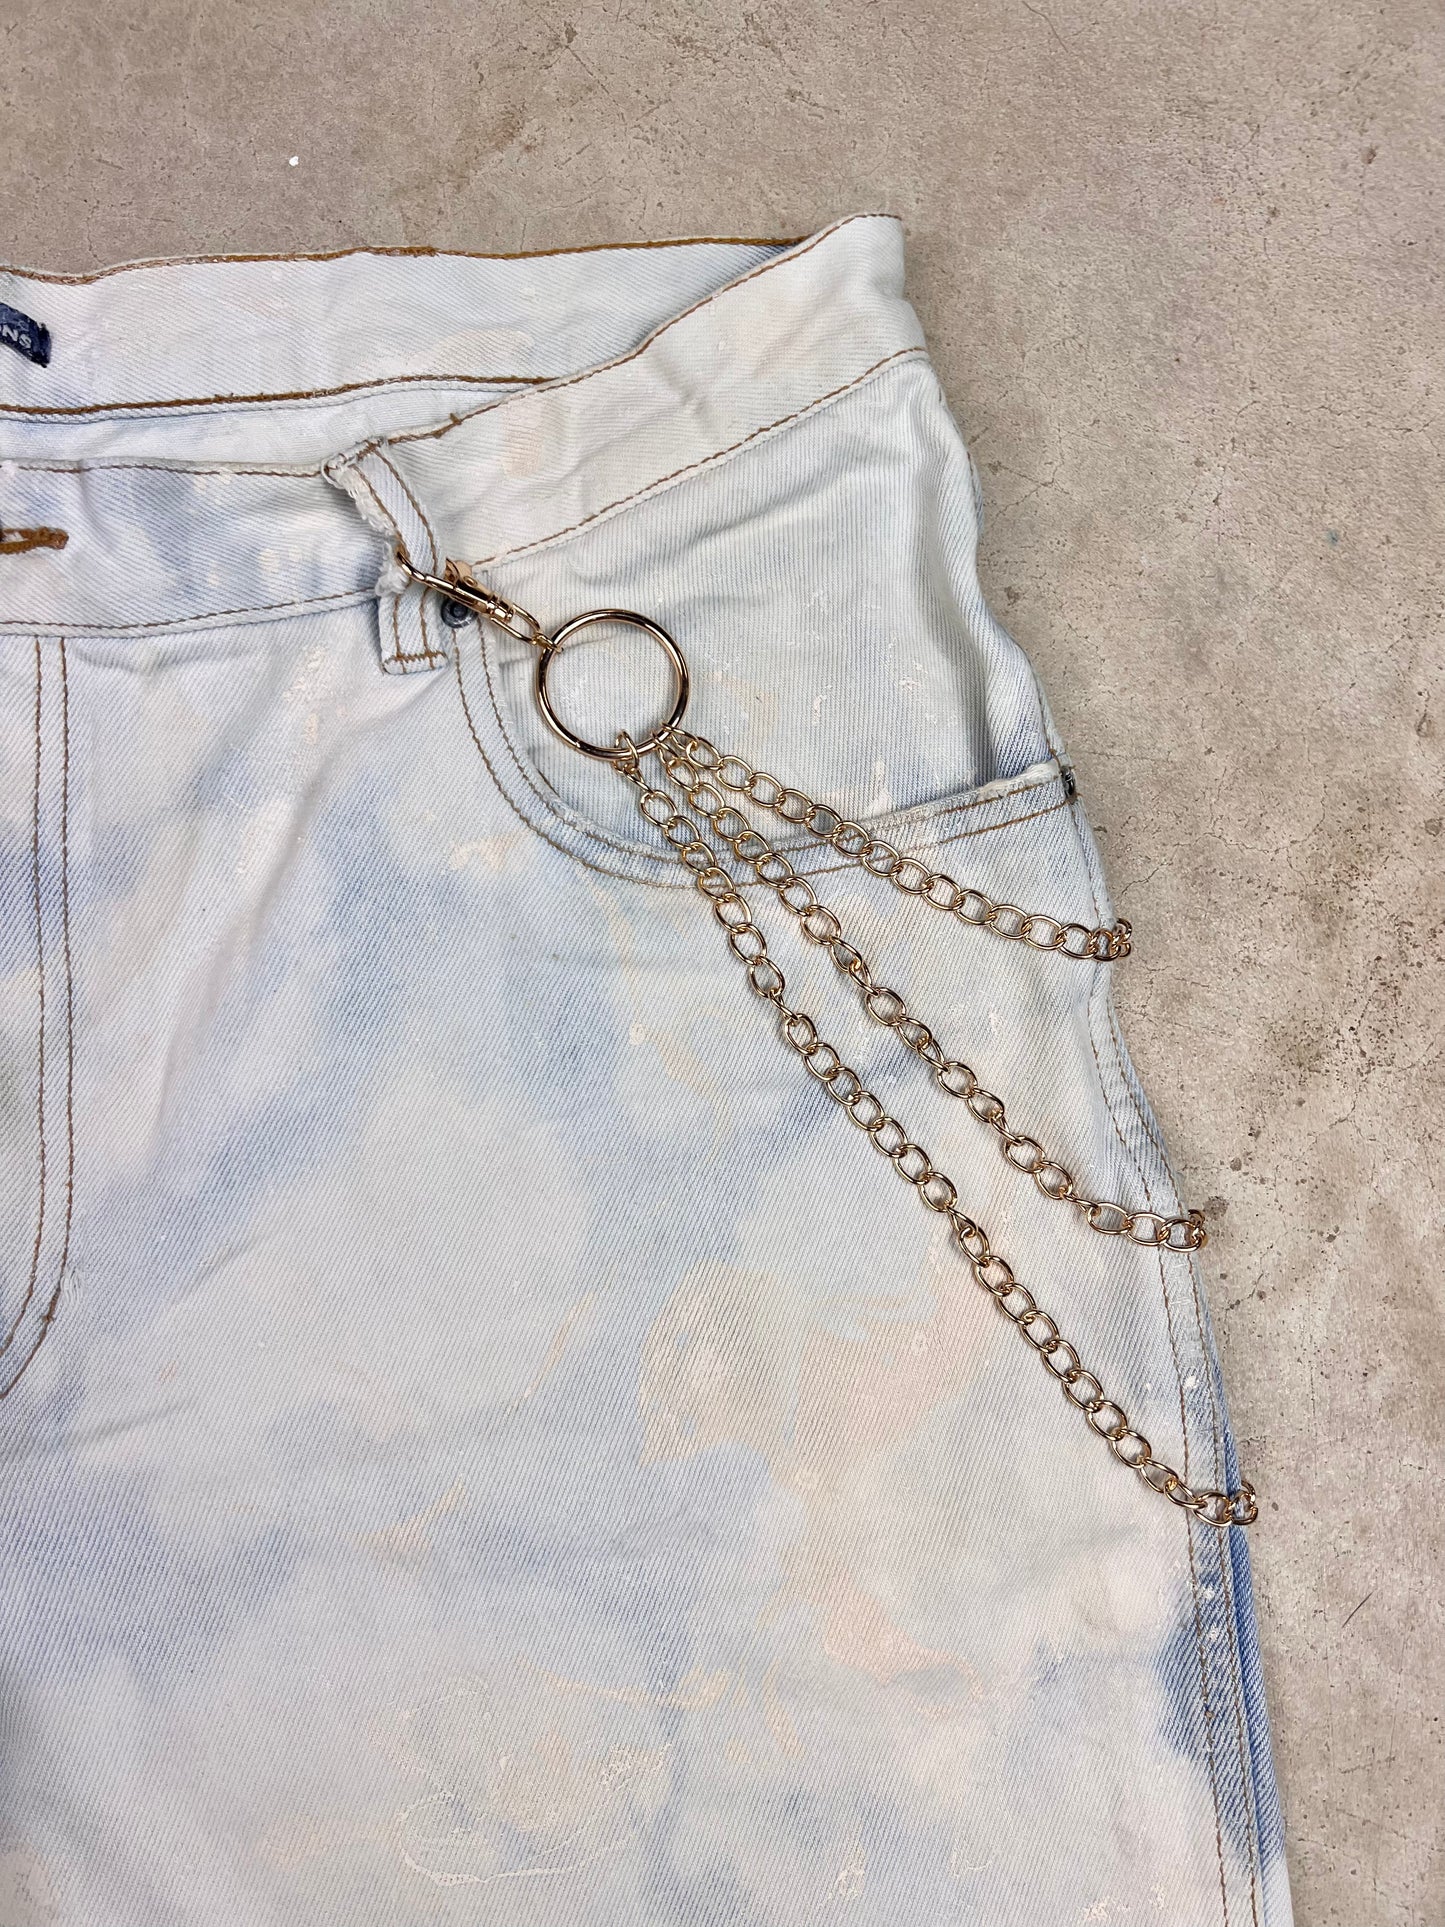 The Bleached Marbled Denim Shorts - 38"